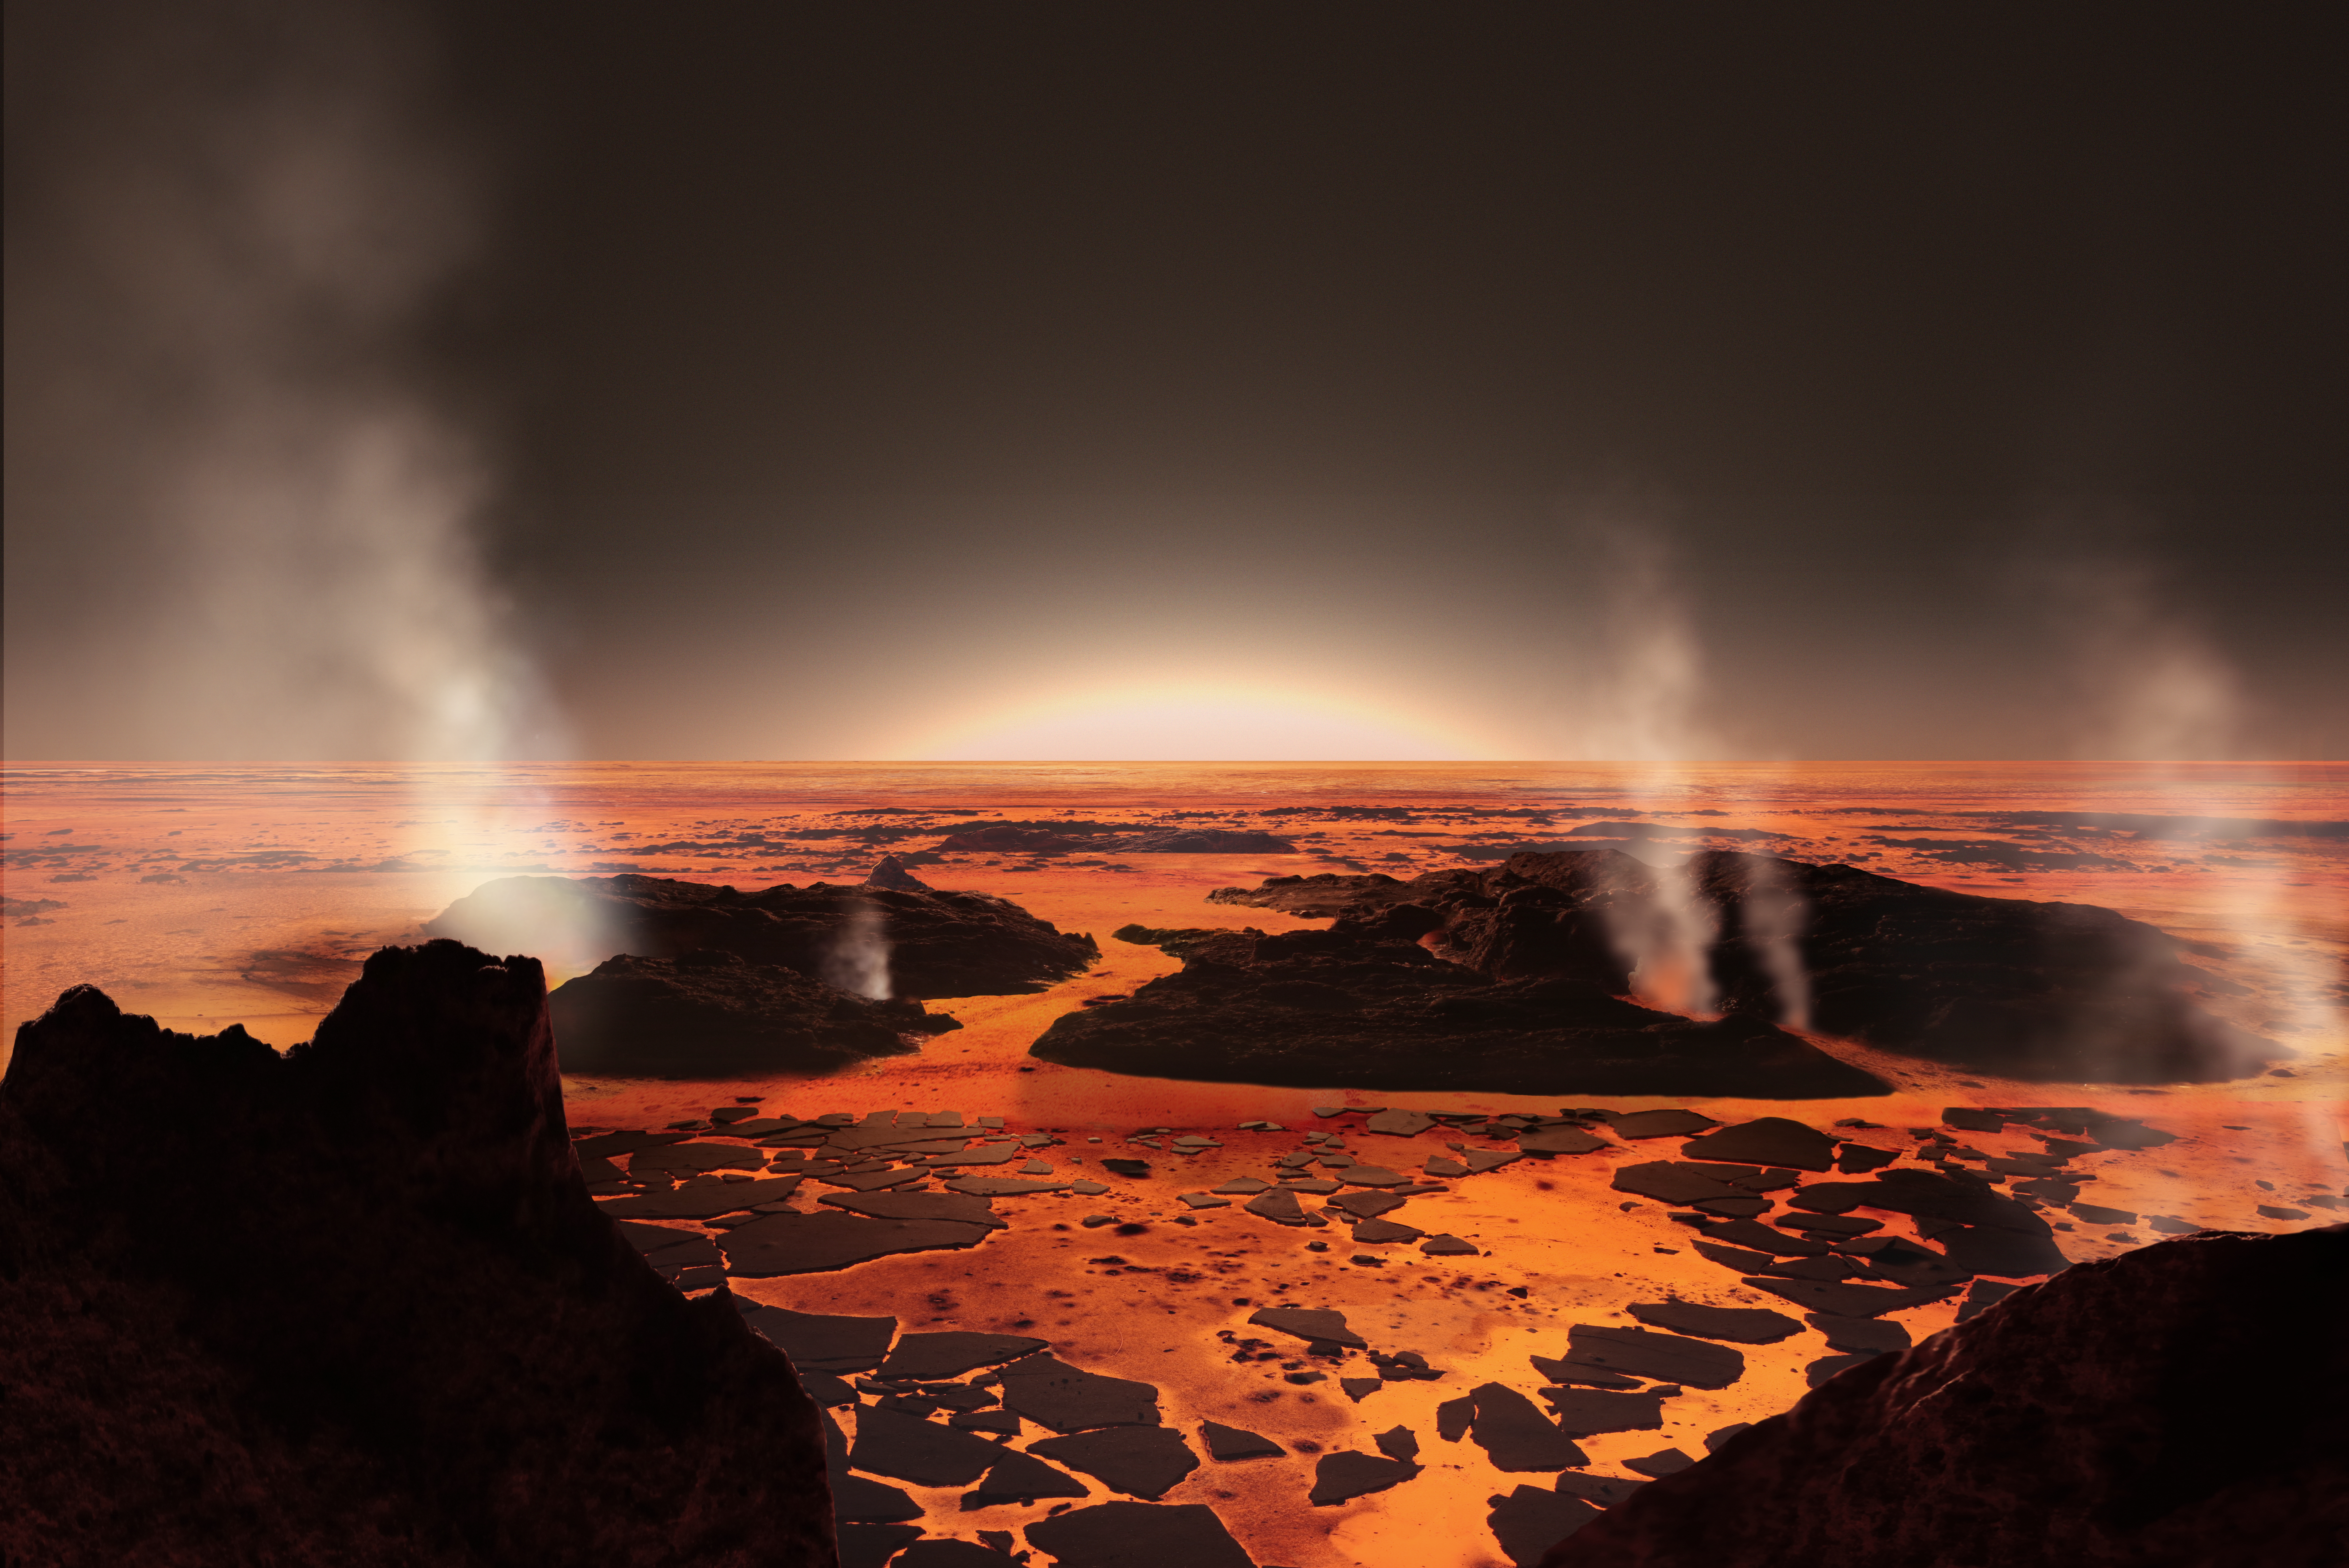 Conceptual work based on data from Astronomer Carlos Alvarez/Keck Observatory. Here, we see a lava ocean planet with some solid pieces of land floating on the planet’s surface; a fiery 3,000 to 4,000 degrees Fahrenheit! The discovery was announced in 2017 using data from Kepler Space Telescope K2 mission. The Keck Observatory’s NIRC2 instrument was key to determining a singular star system.